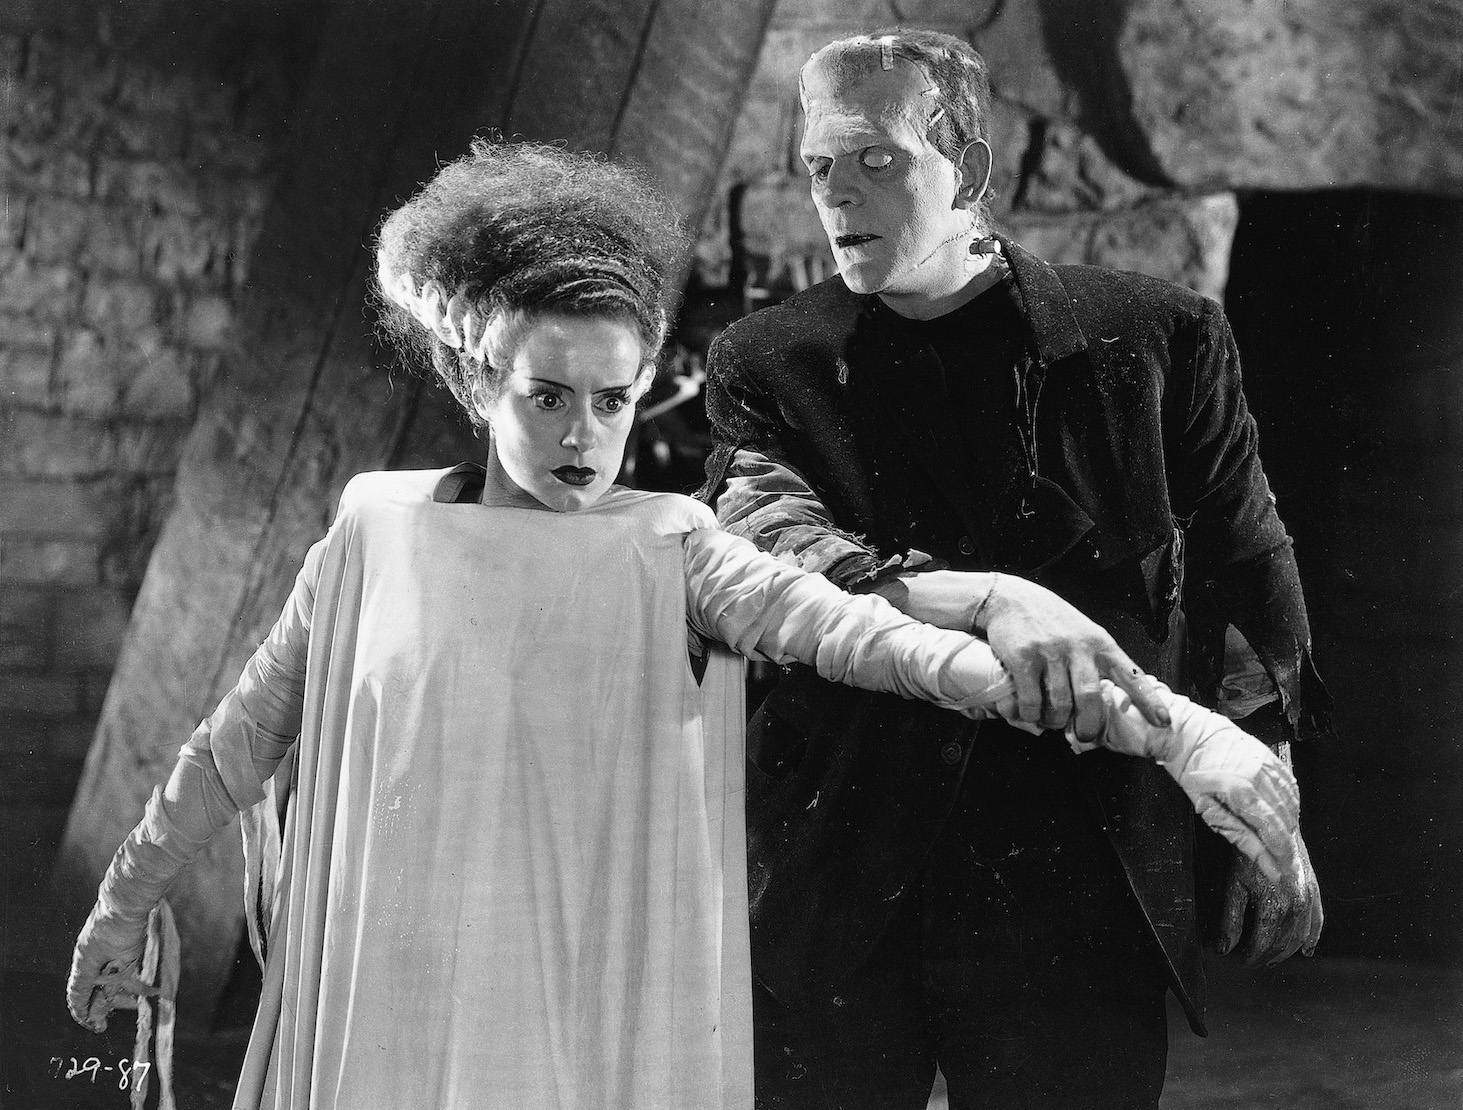 Film Review: “Boris Karloff: The Man Behind the Monster” Tells the ...